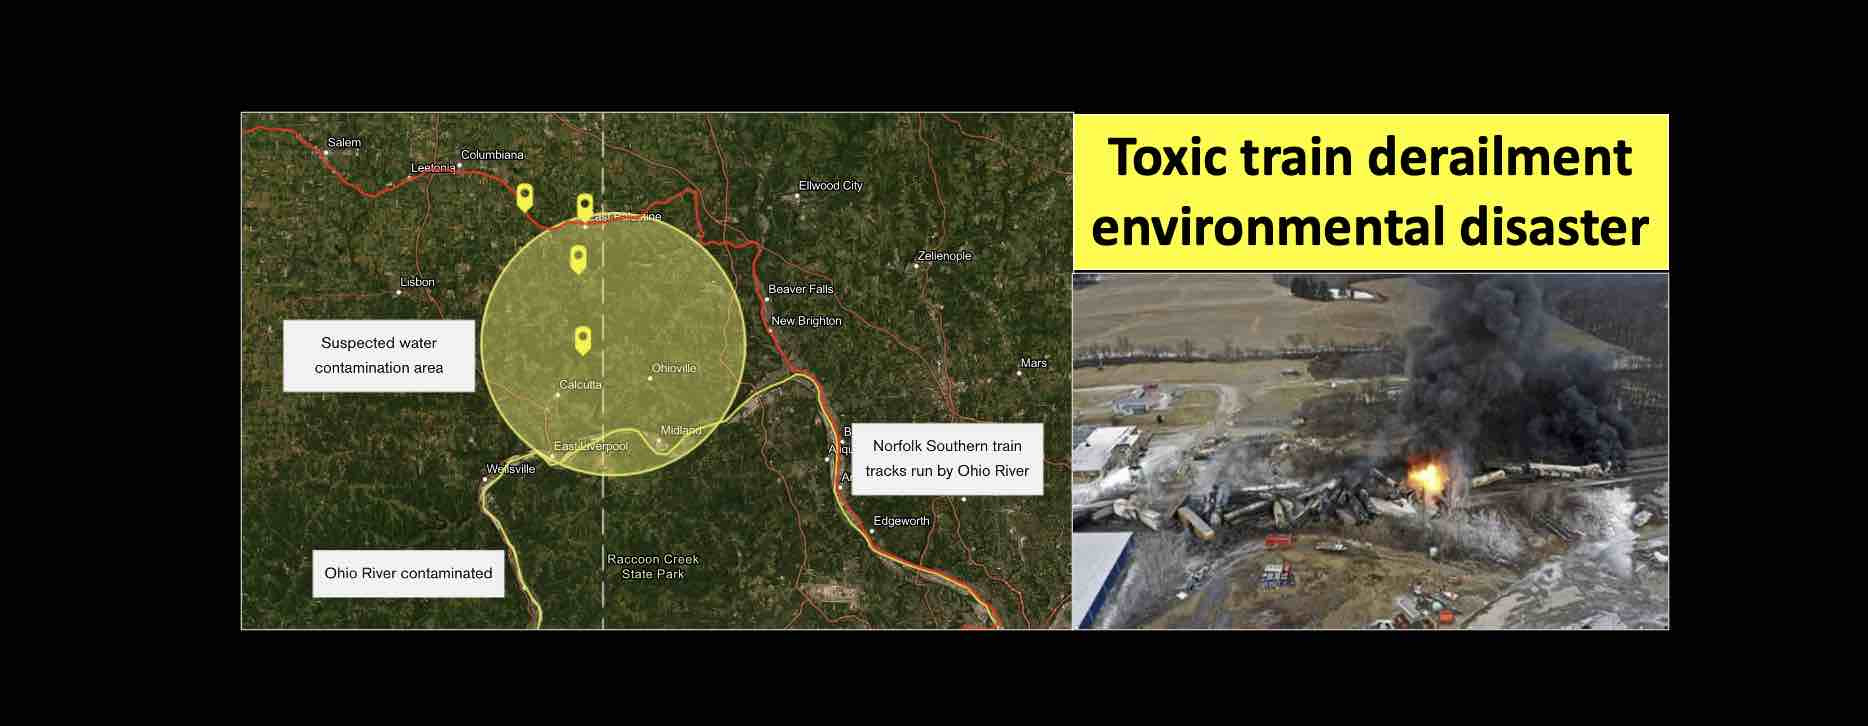 Mapping environmental disaster from Ohio toxic train derailment